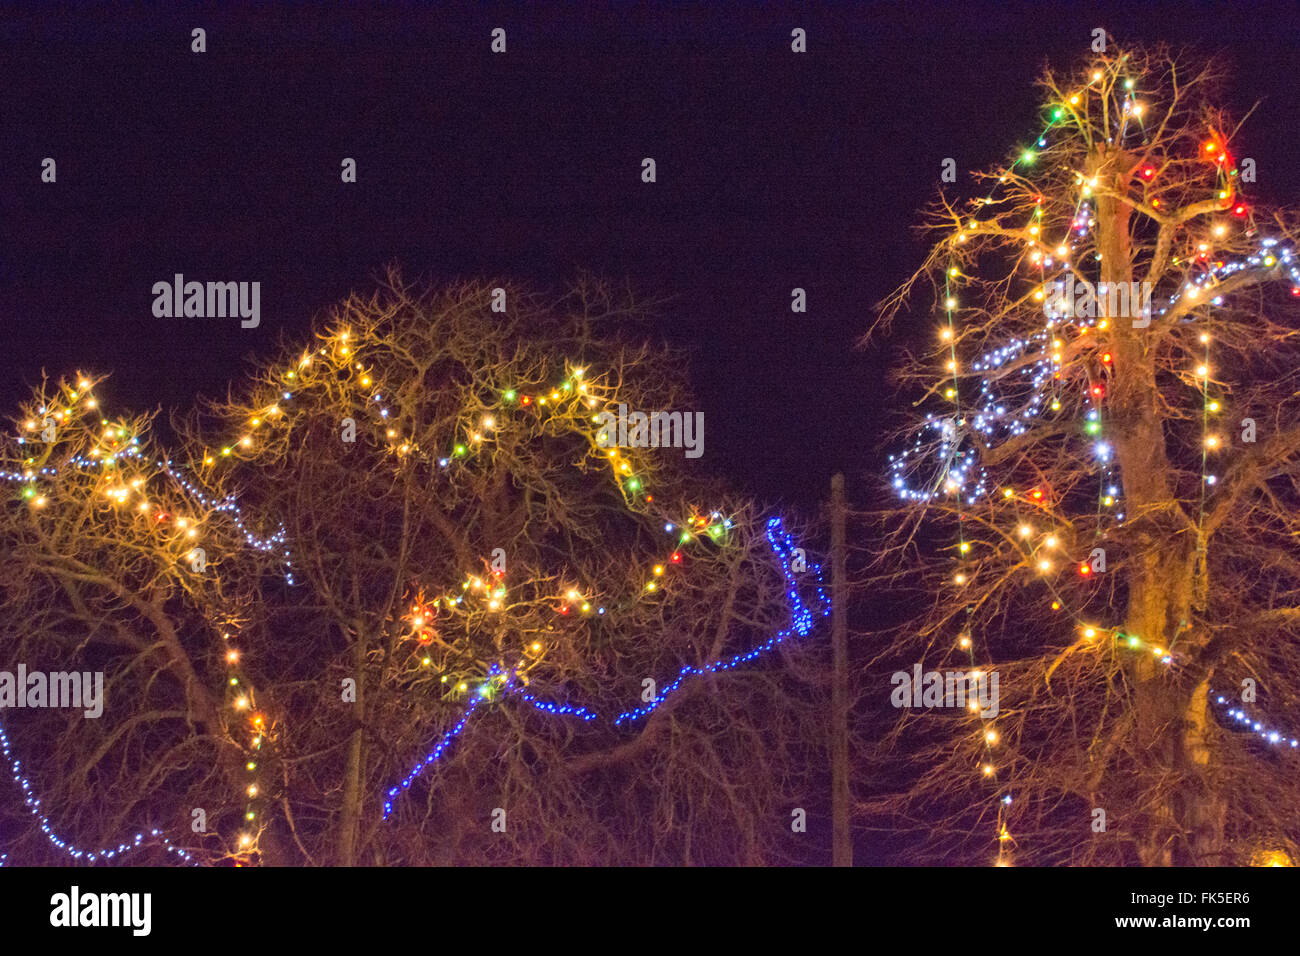 Christmas lights in trees Stock Photo